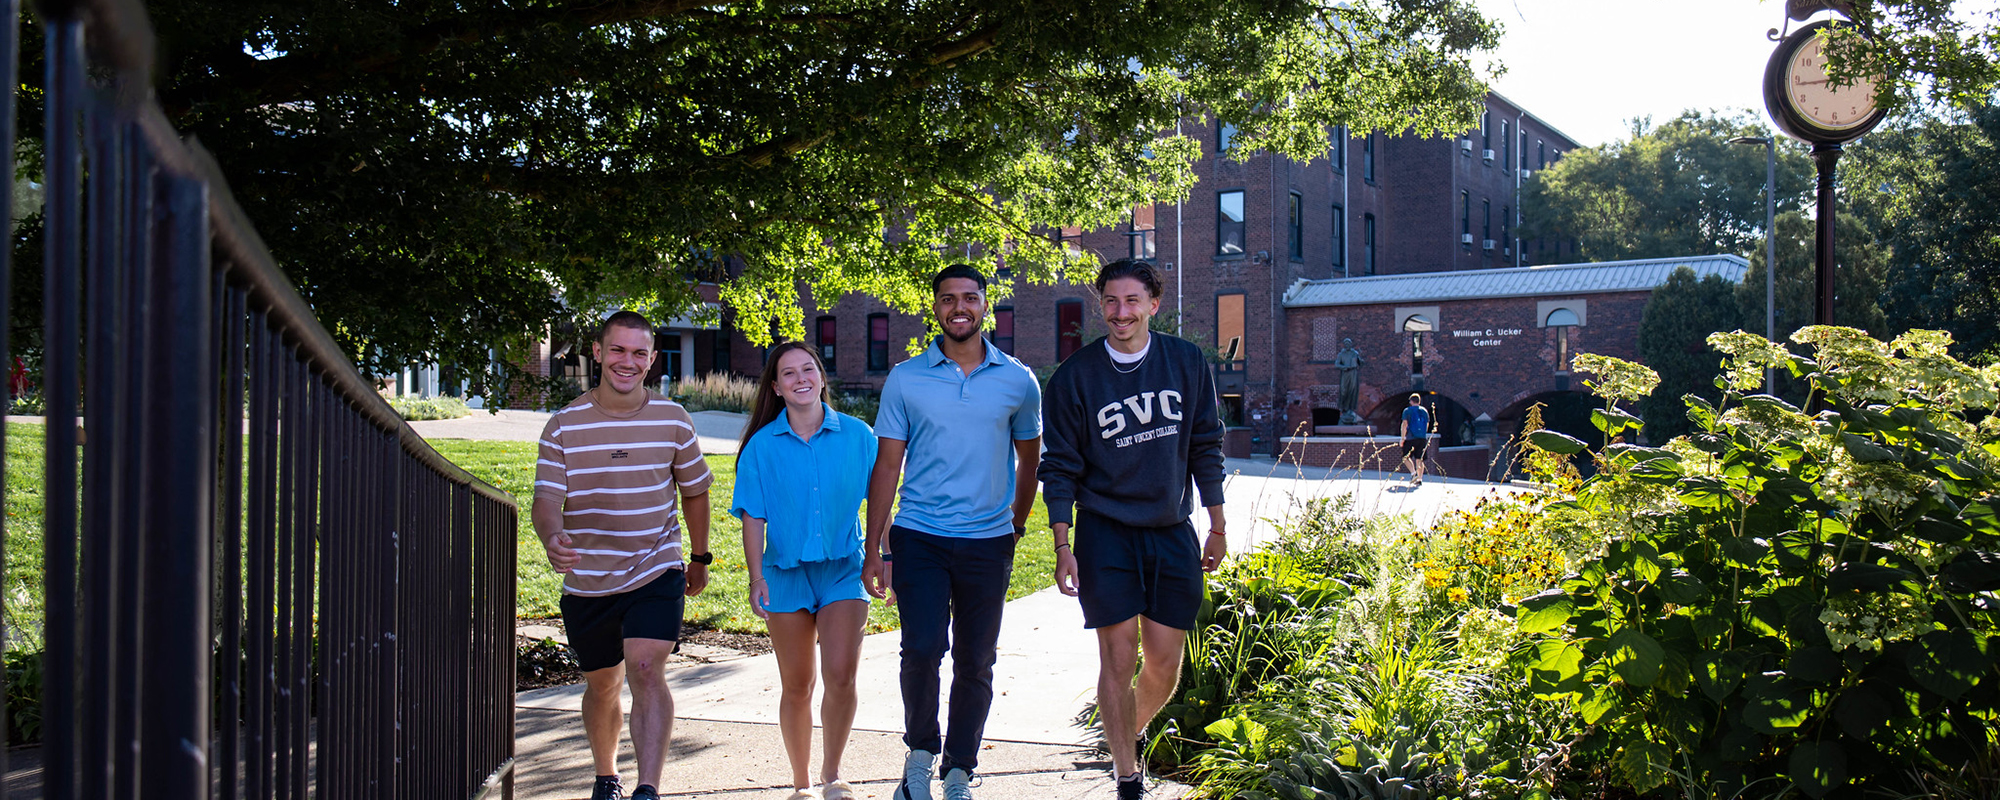 students walking SVC's campus in summer